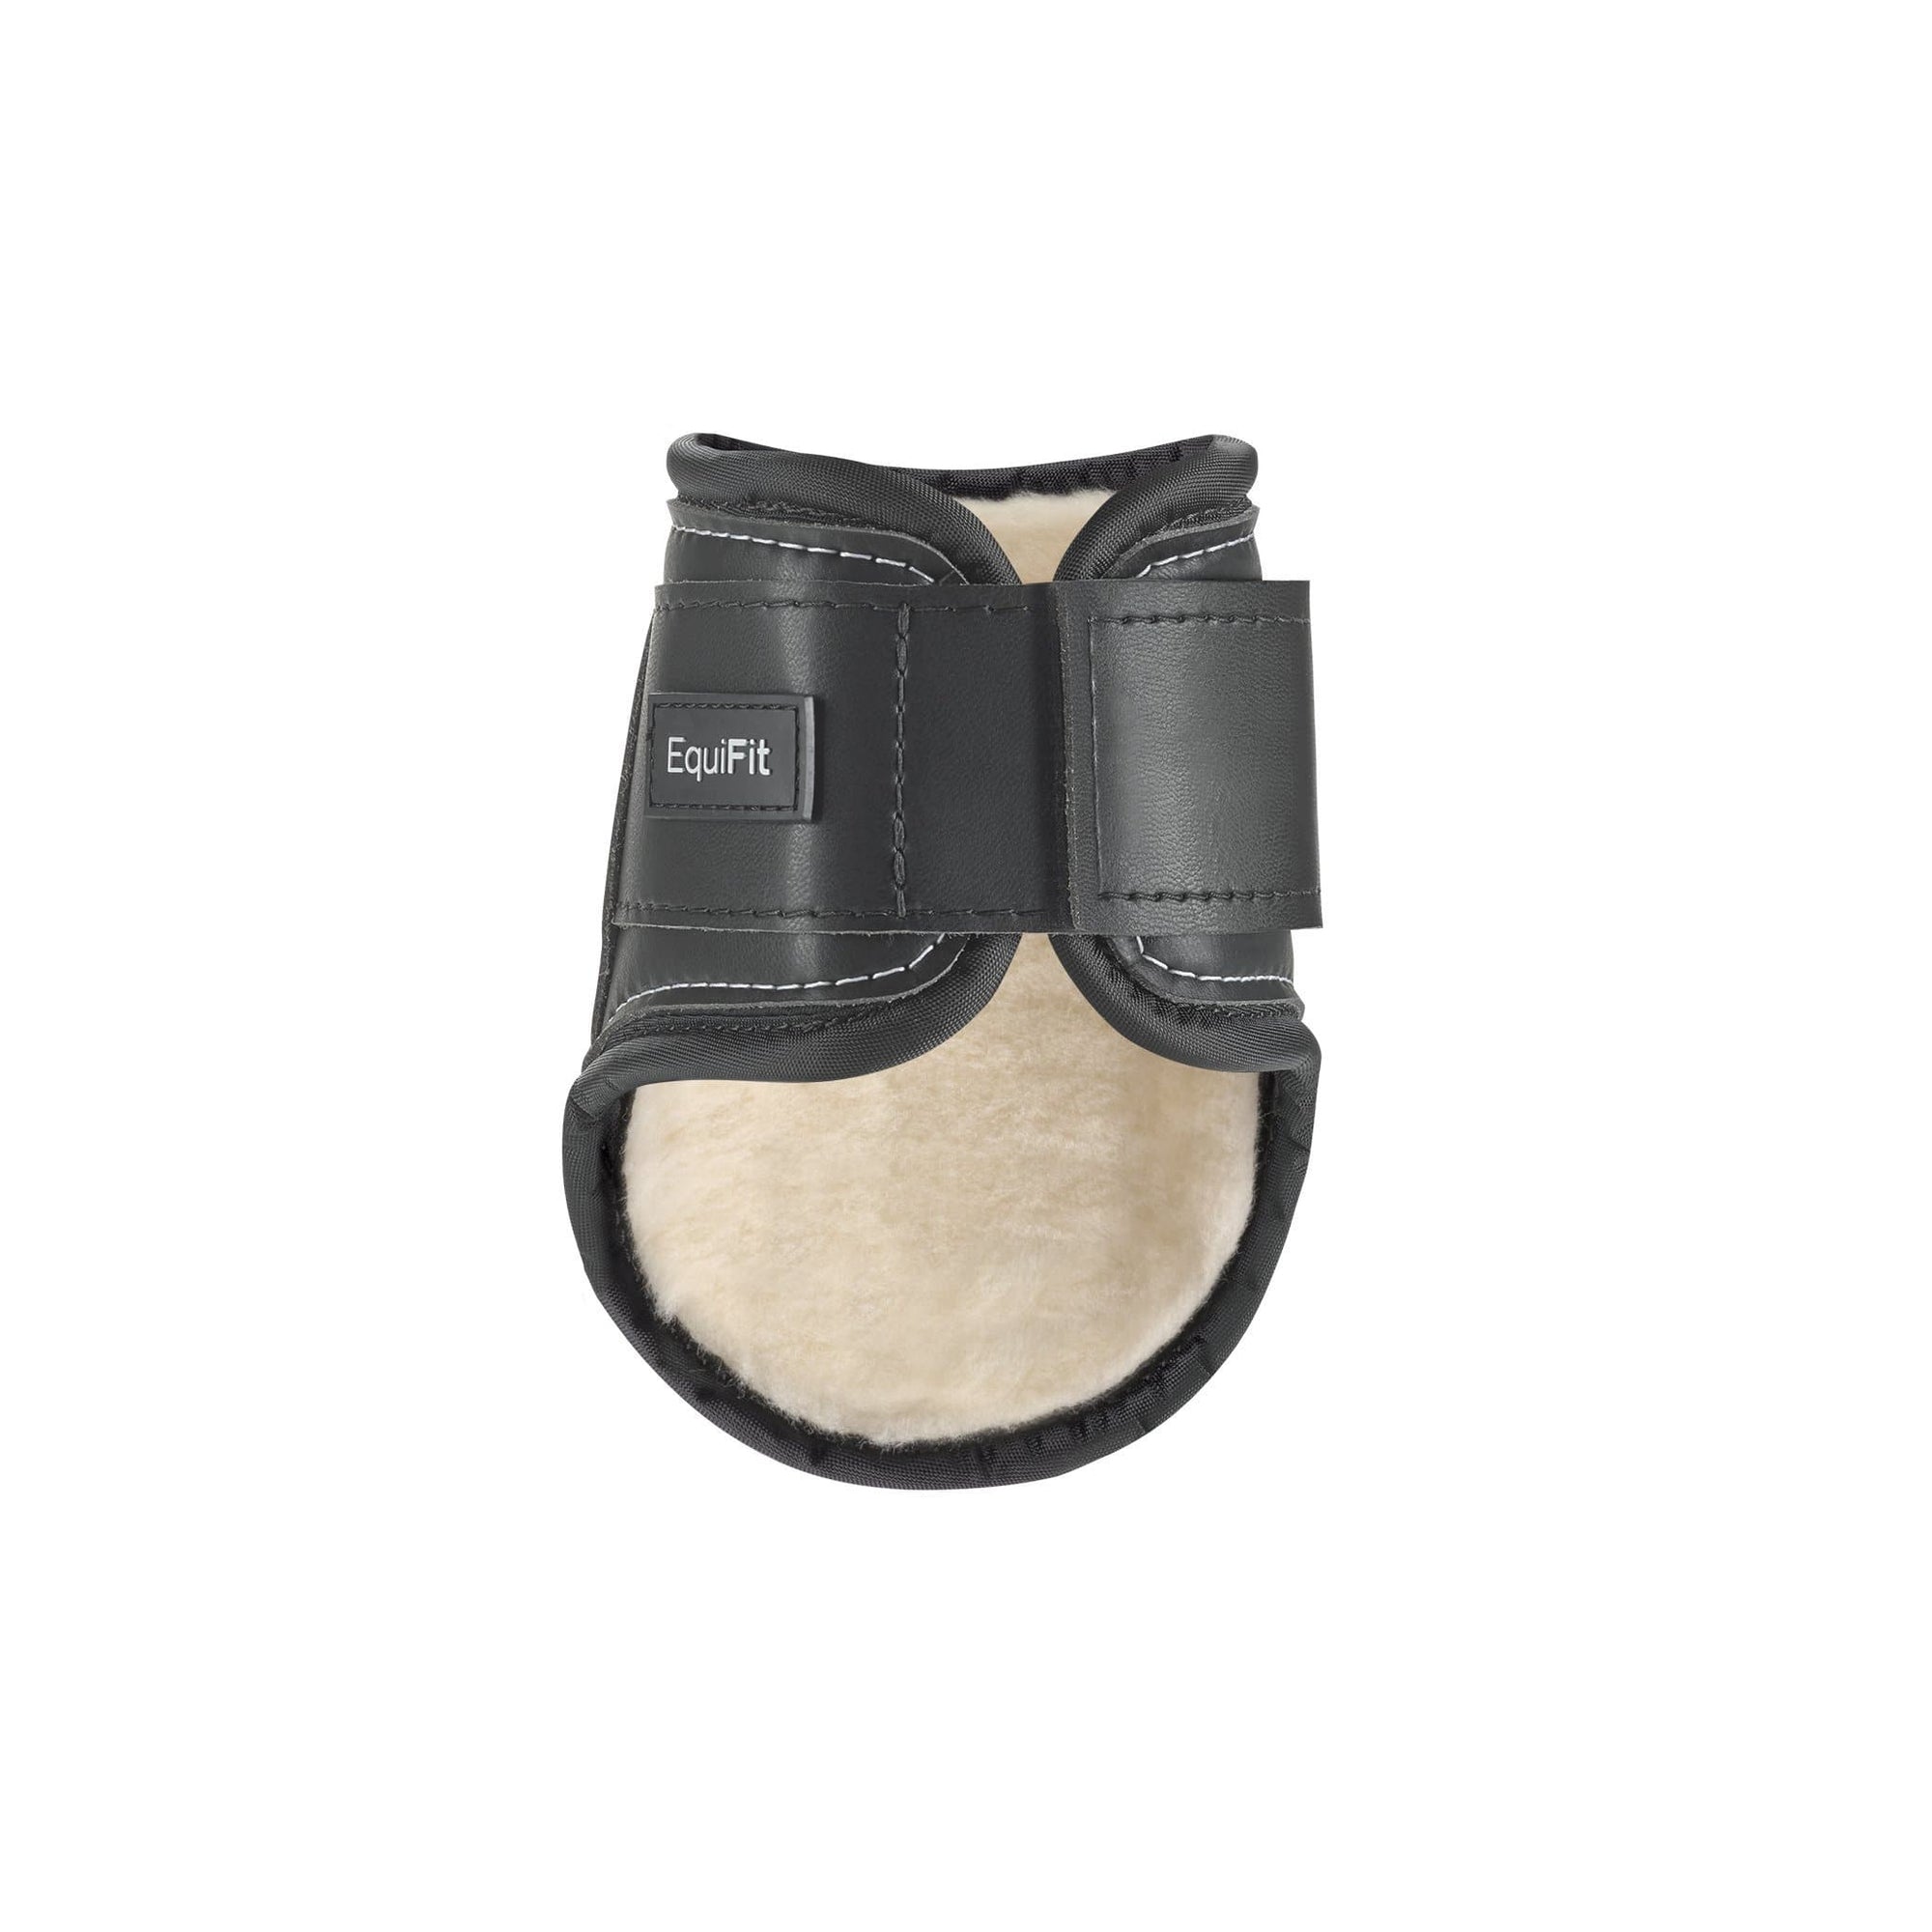 The Young Horse Hind Boot is a low profile boot that offers great coverage without intimidating the sensitive young horse.